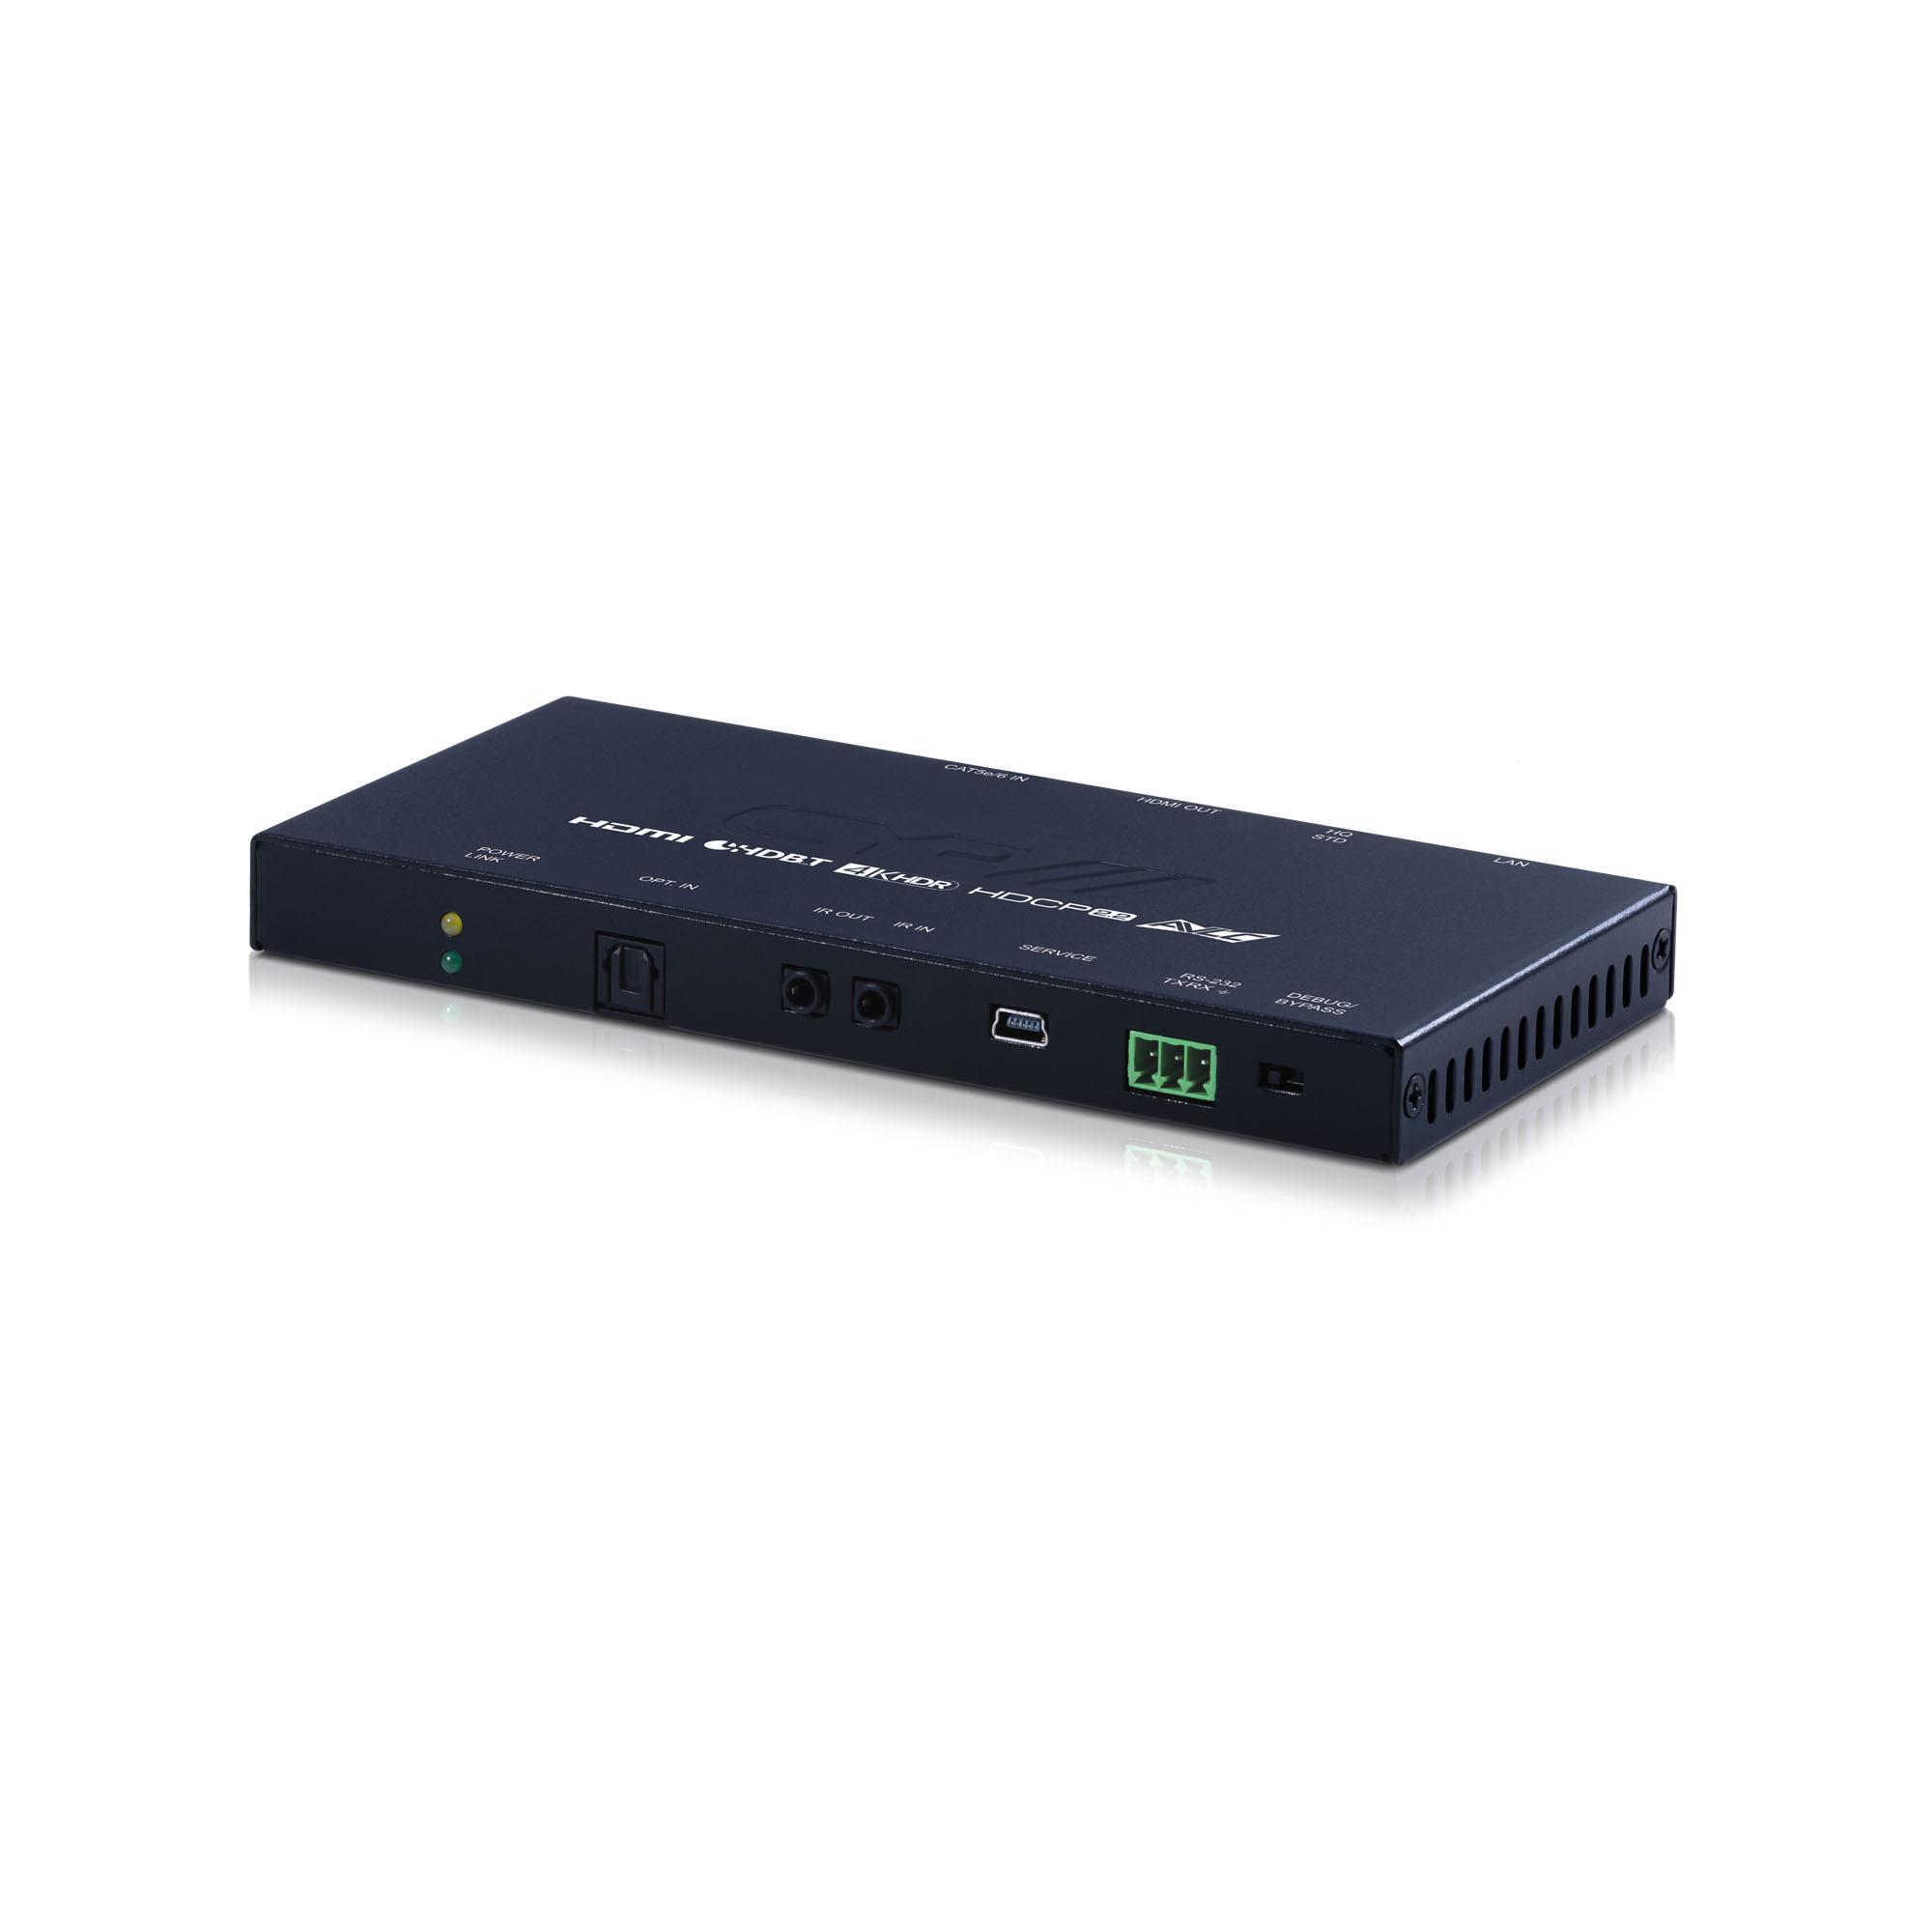 PUV-1830RX-AVLC 5-Play HDBaseT™ Receiver (inc. PoH & single LAN, up to 100m, Audio AVLC)